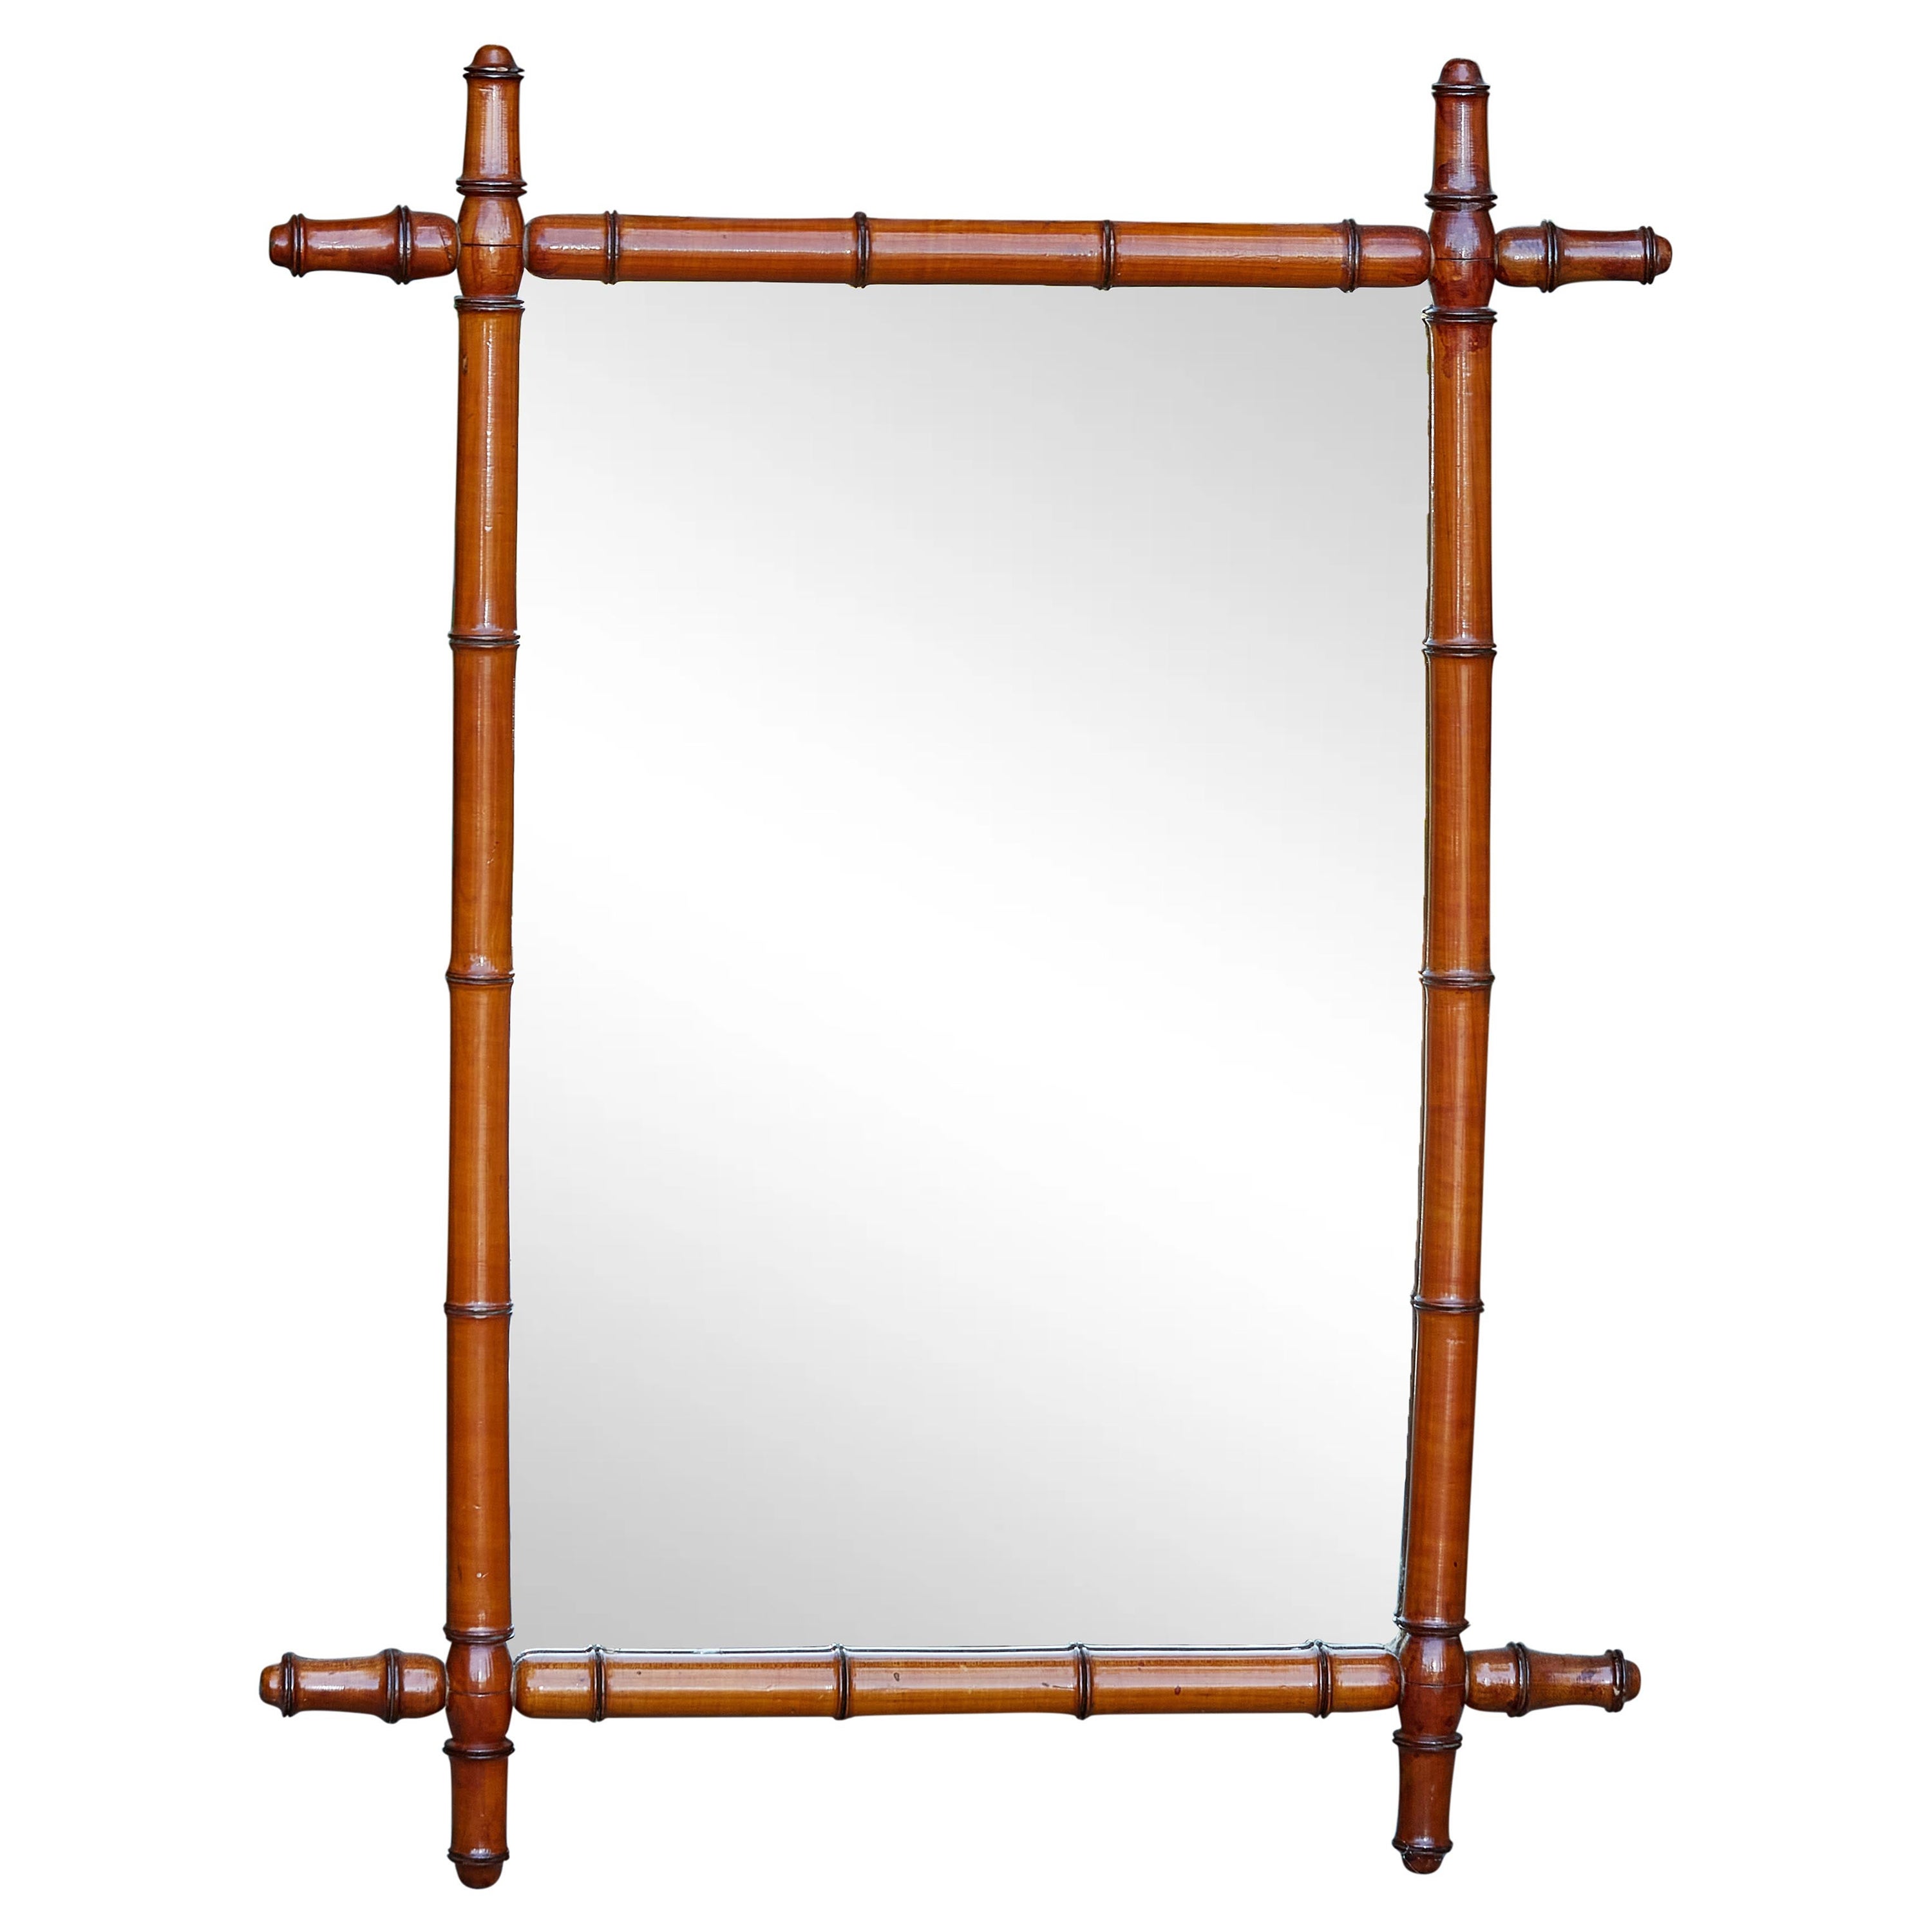 Rustic French 1920s Walnut Faux-Bamboo Mirror with Honey Brown Color For Sale